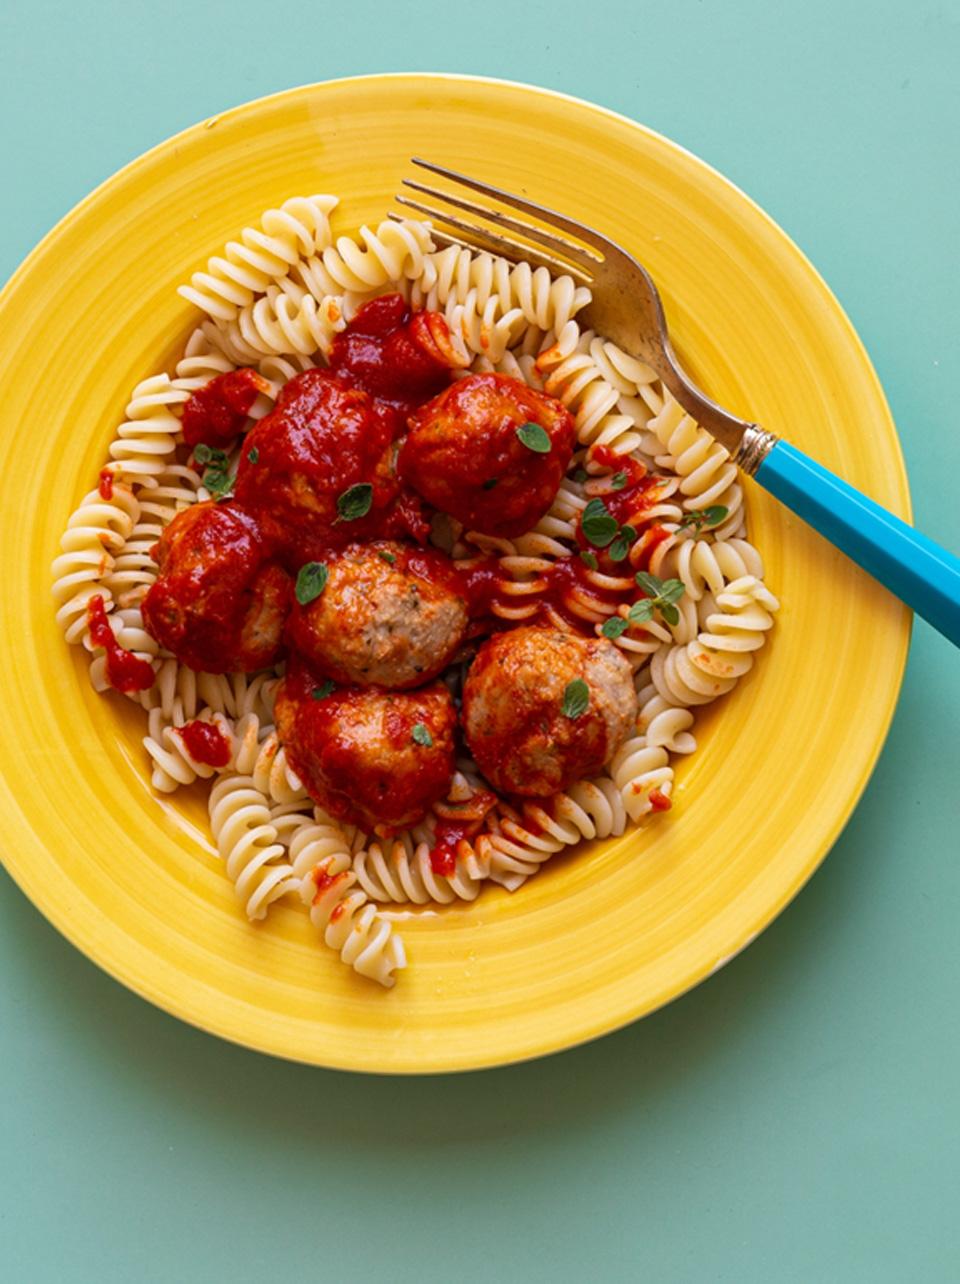 Meatballs with pasta